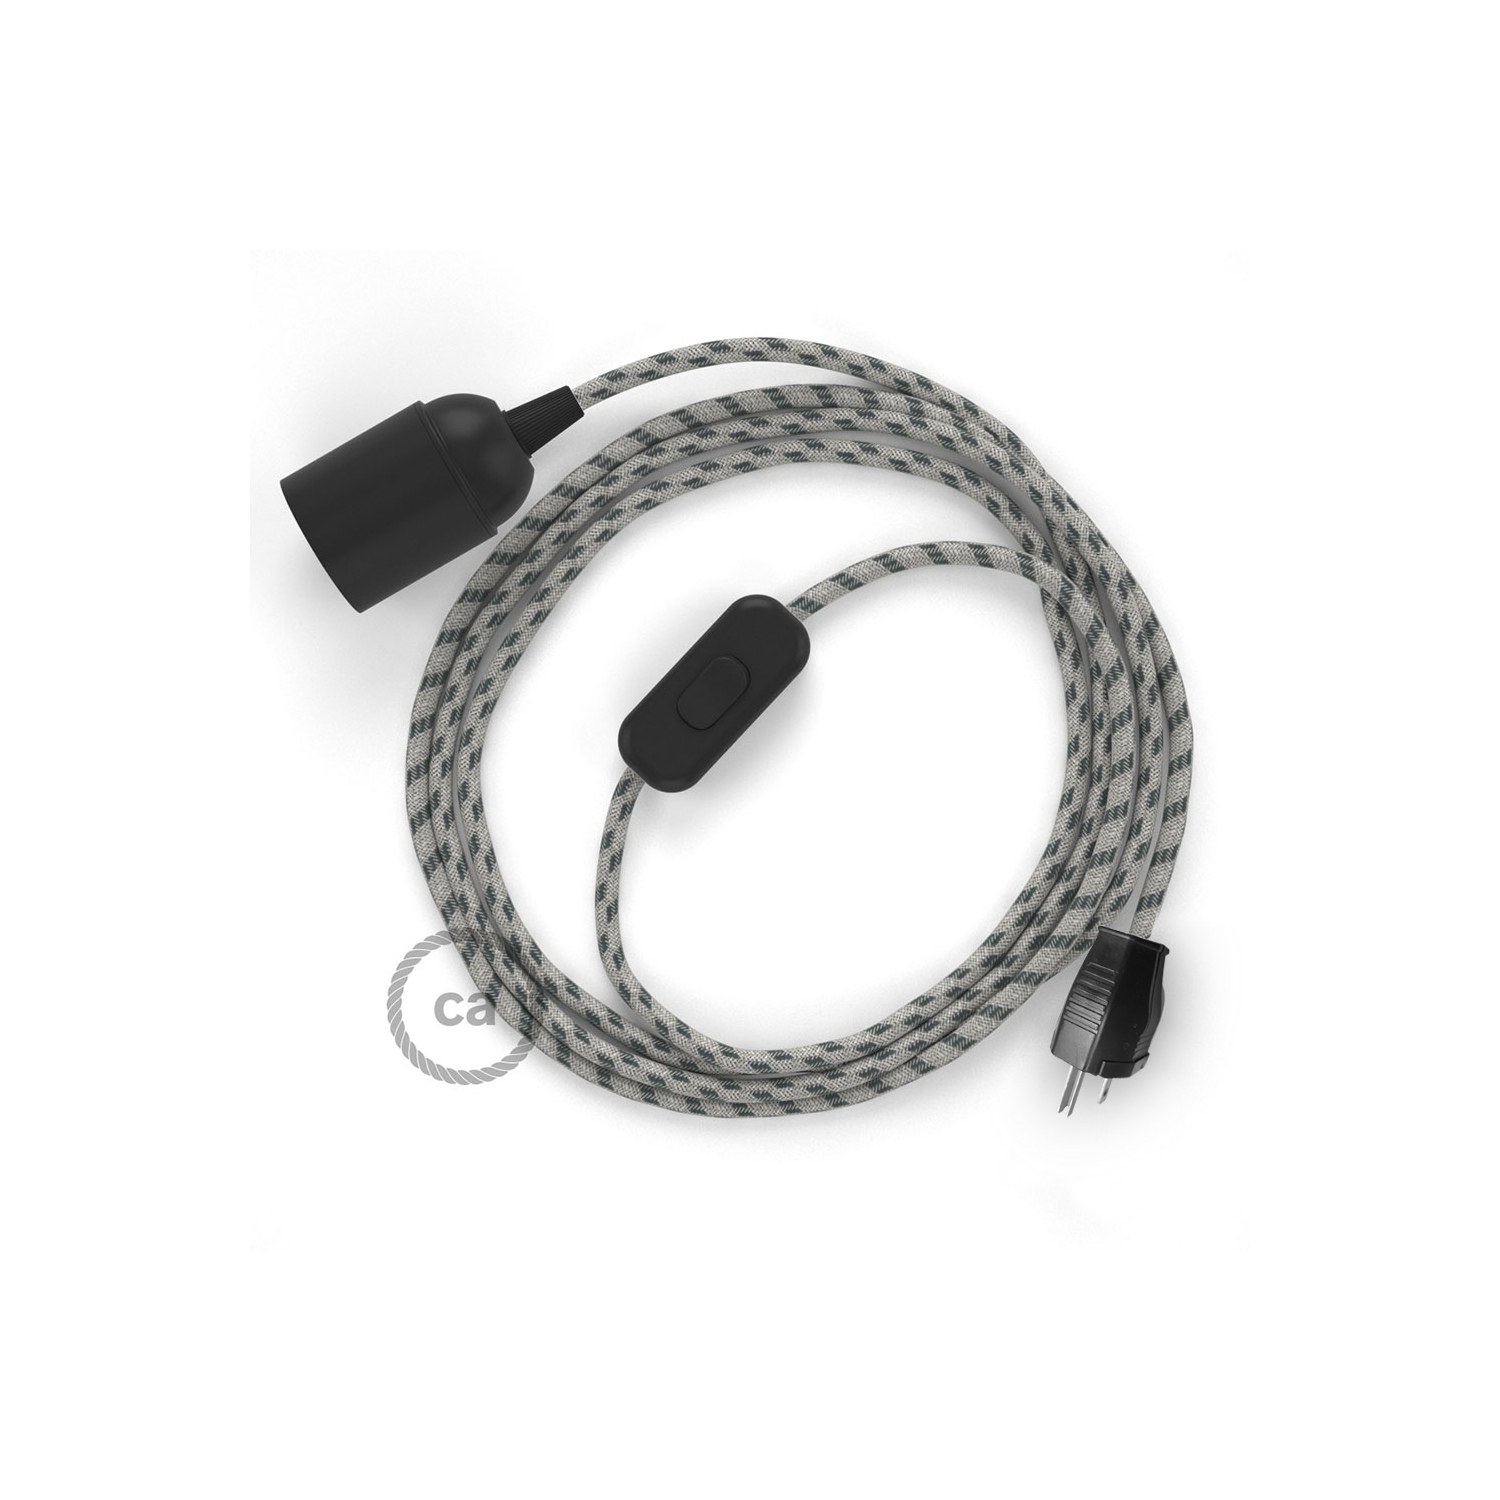 Plug-in Pendant with inline switch | RD54 Natural & Charcoal Linen Stripe